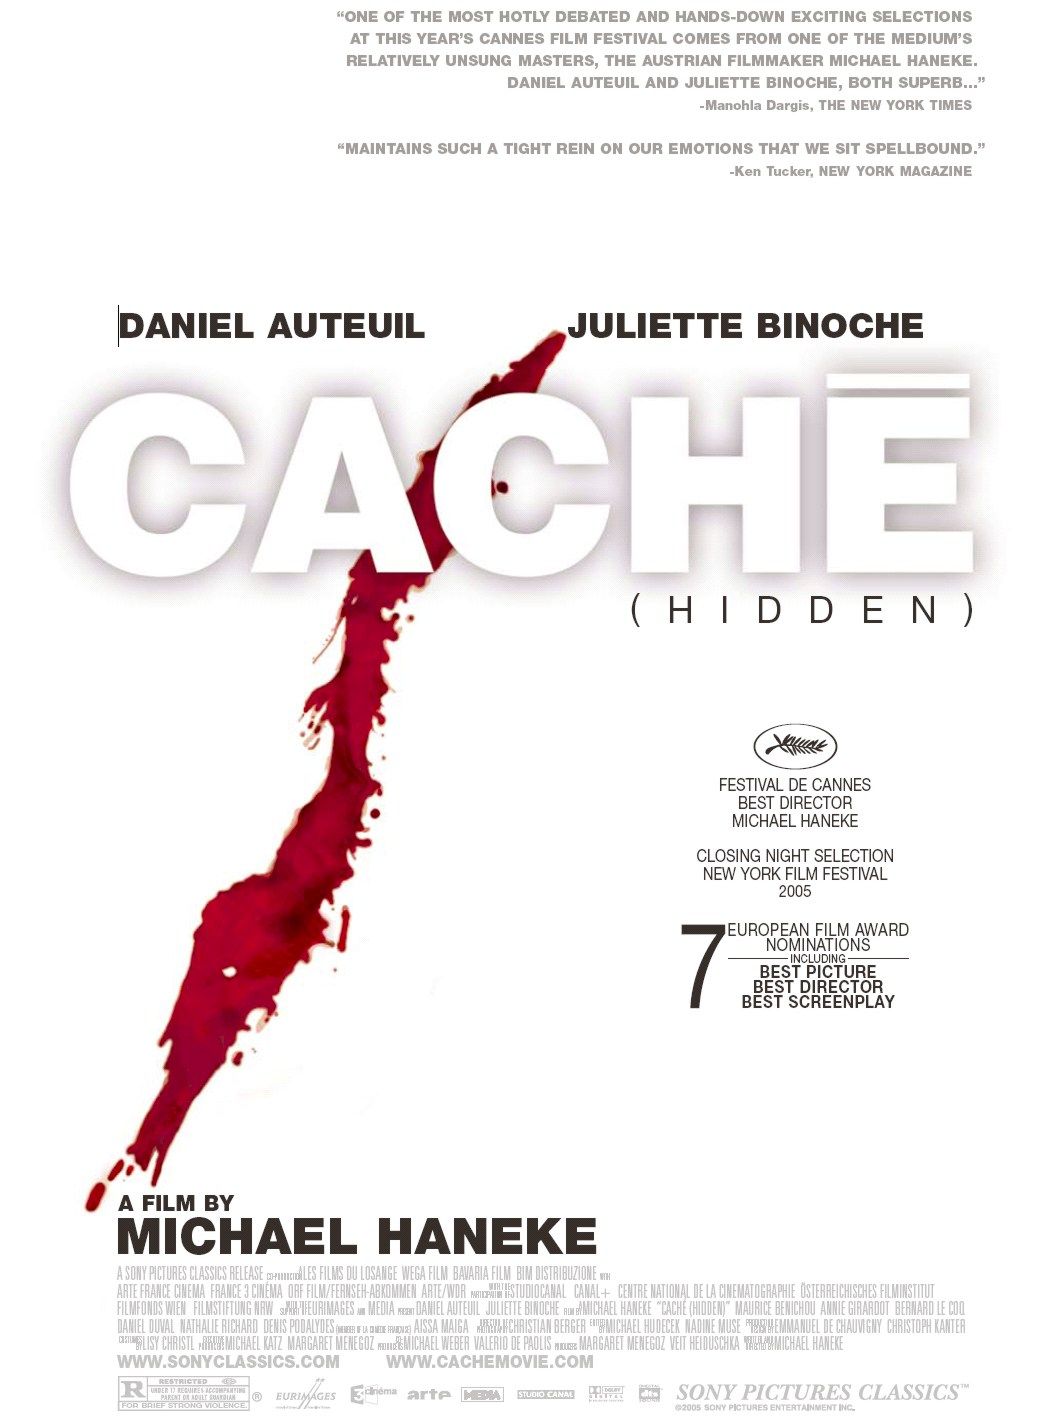 Remembrance of Things Hidden: Film Review of Michael Haneke’s  Caché